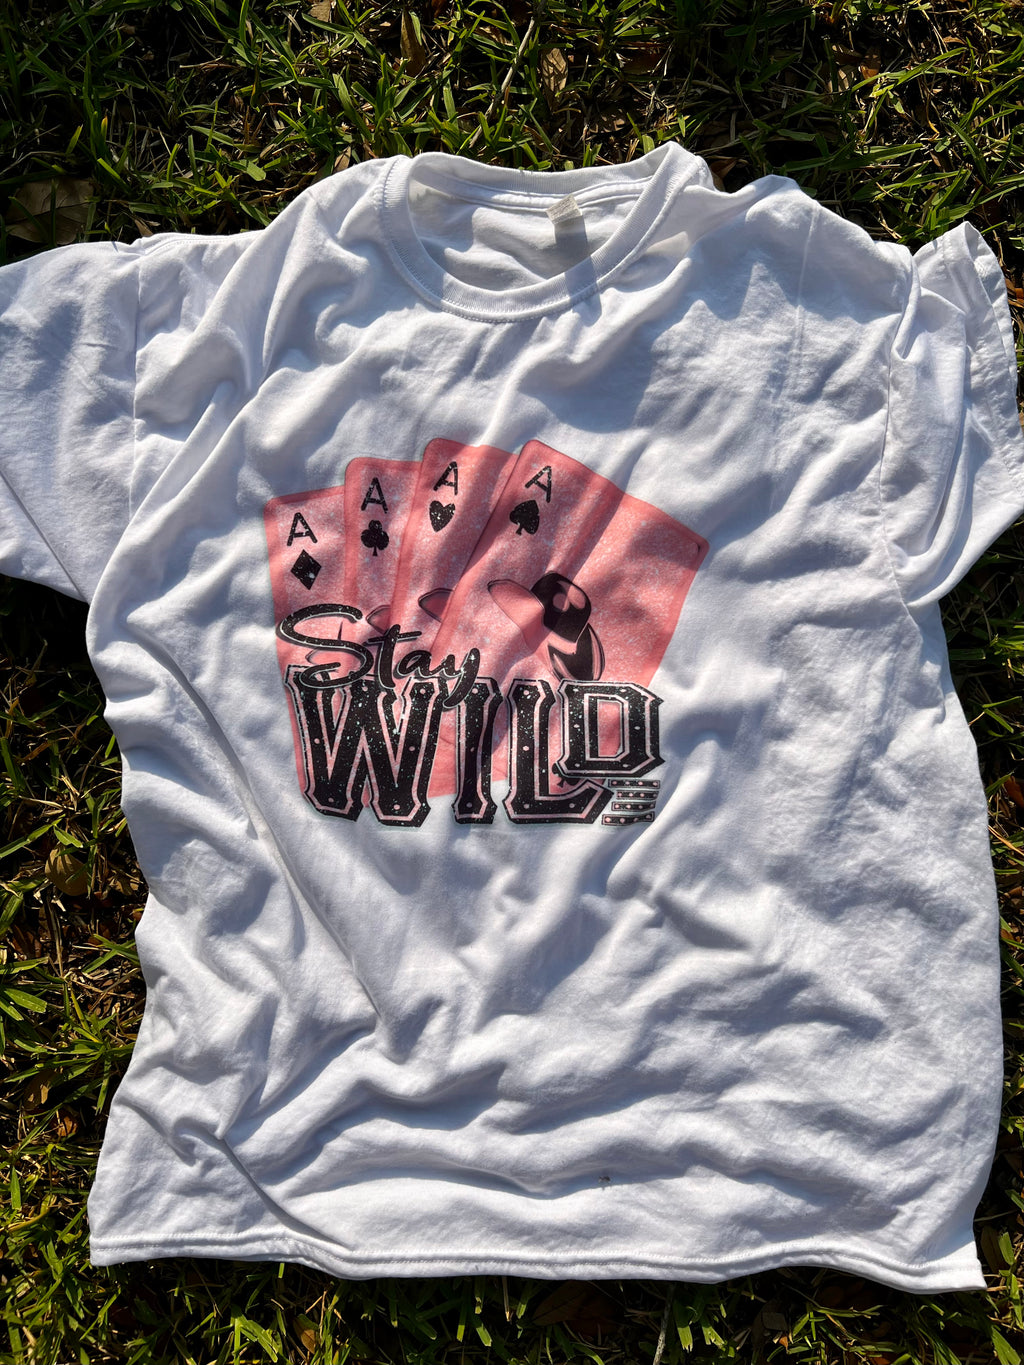 Stay Wild Cards Top Design